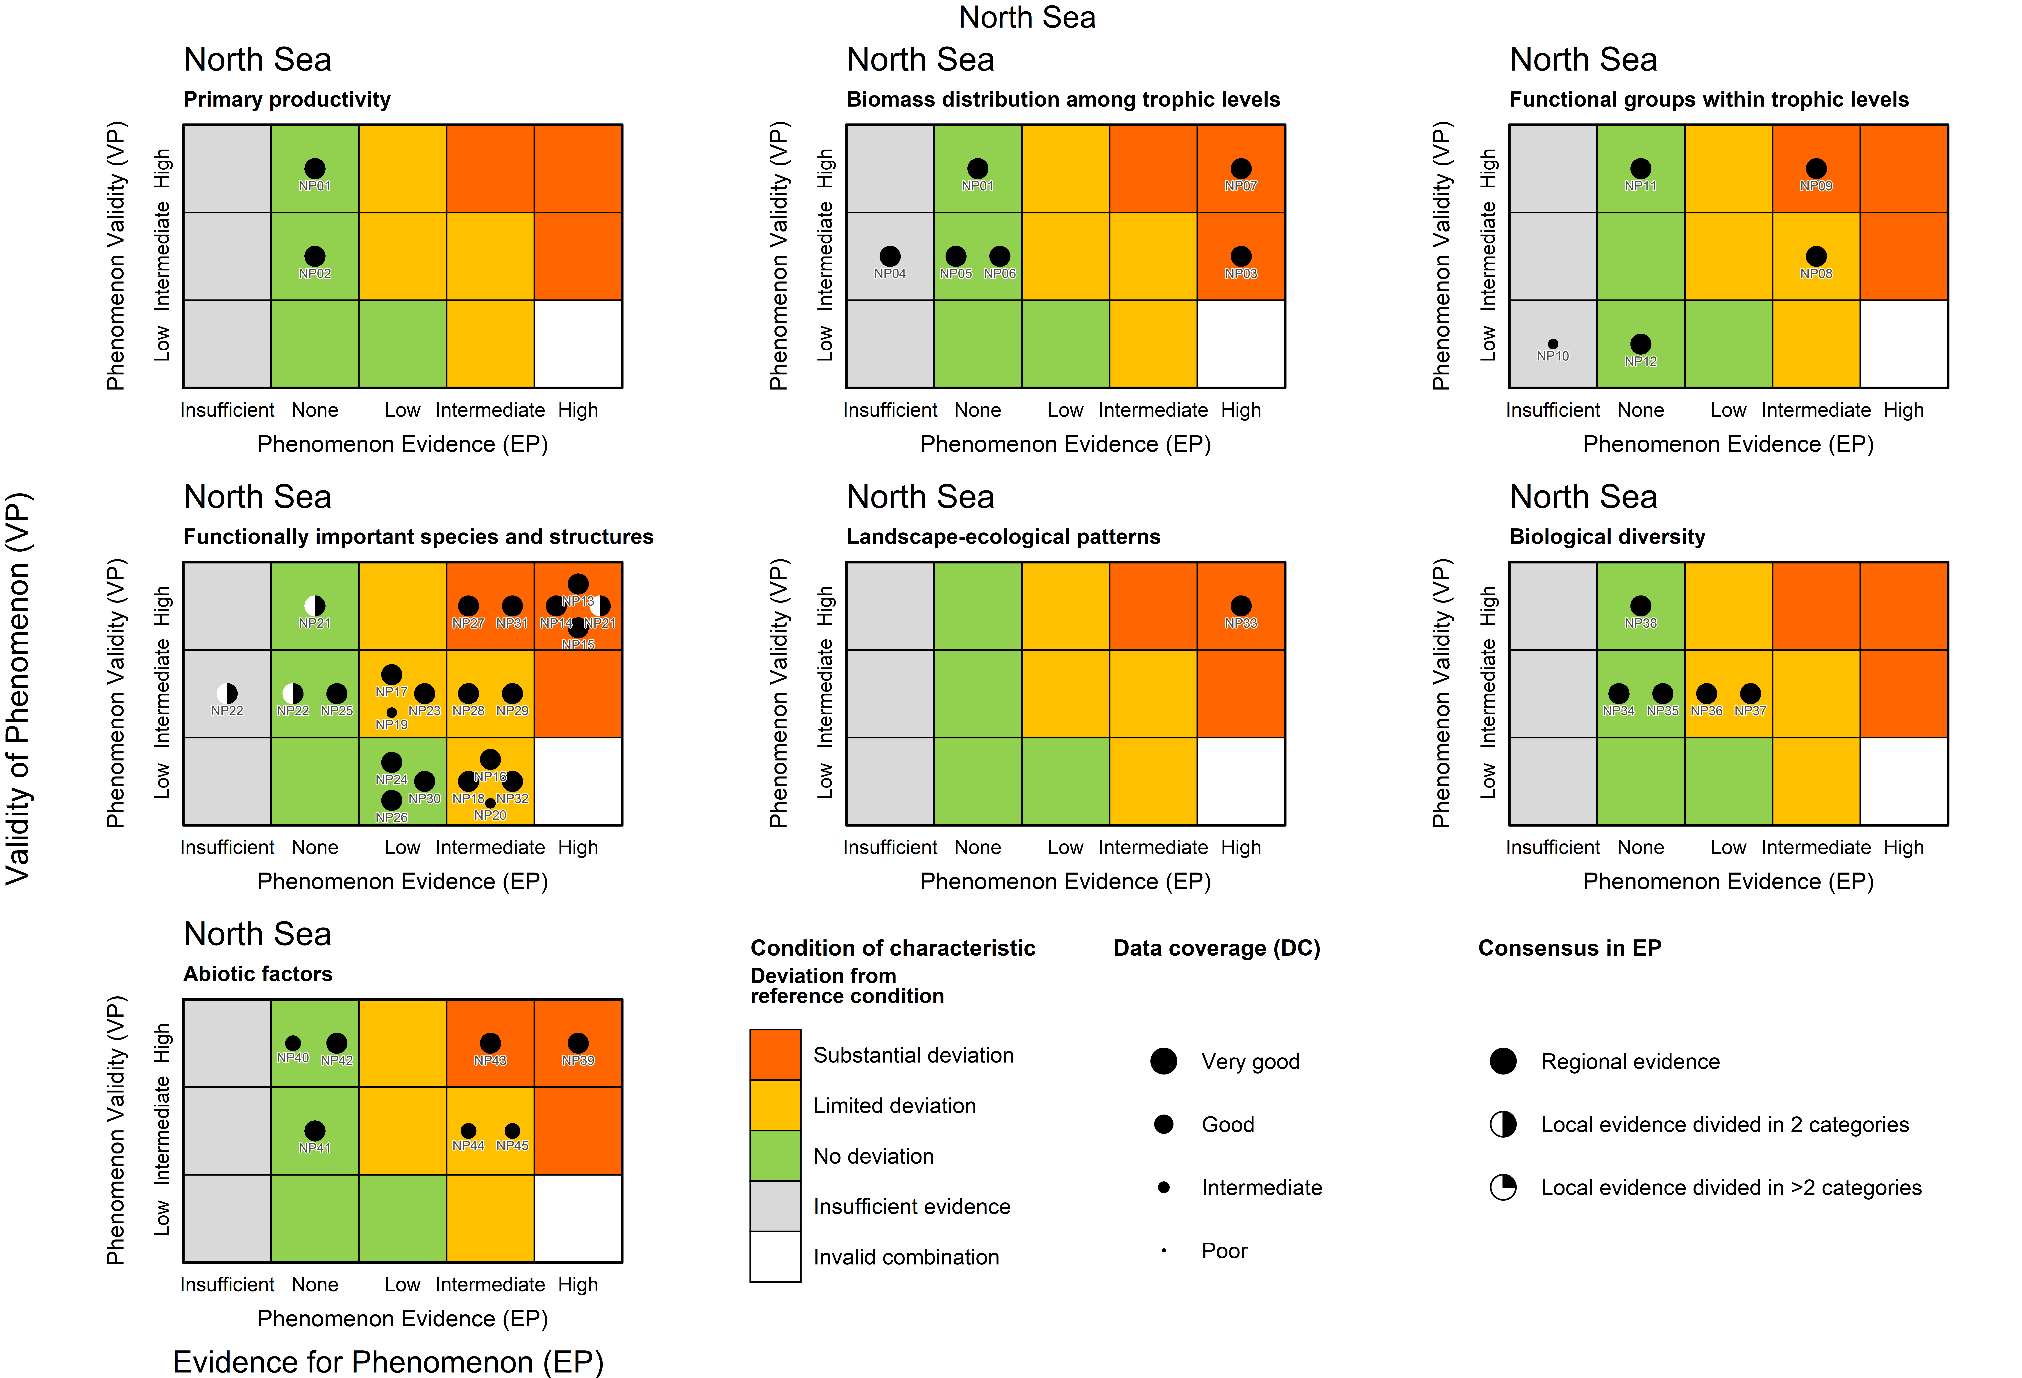 Figure 7.3.1. The PAEC assessment diagram provides an overview of all phenomena for all ecosystem characteristics. Each dot represents the assessment of a phenomenon with ID (from Table 5.1). The size of the dot indicates the data coverage (DC; larger symbols = better coverage, from Table 7.1). The placement of the dot shows the value for the validity (VP) of the phenomenon and the levels of evidence (EP) for the phenomenon (from Table 7.2). Note that phenomena which are scored as EP=Insufficient, should not be accounted for in the assessment, but are plotted to highlight phenomena for which data coverage and/or quality should be improved for future assessments. Bold lines around the coloured boxes, within the diagrams for each of the ecosystem characteristics, indicate the condition of the respective characteristic